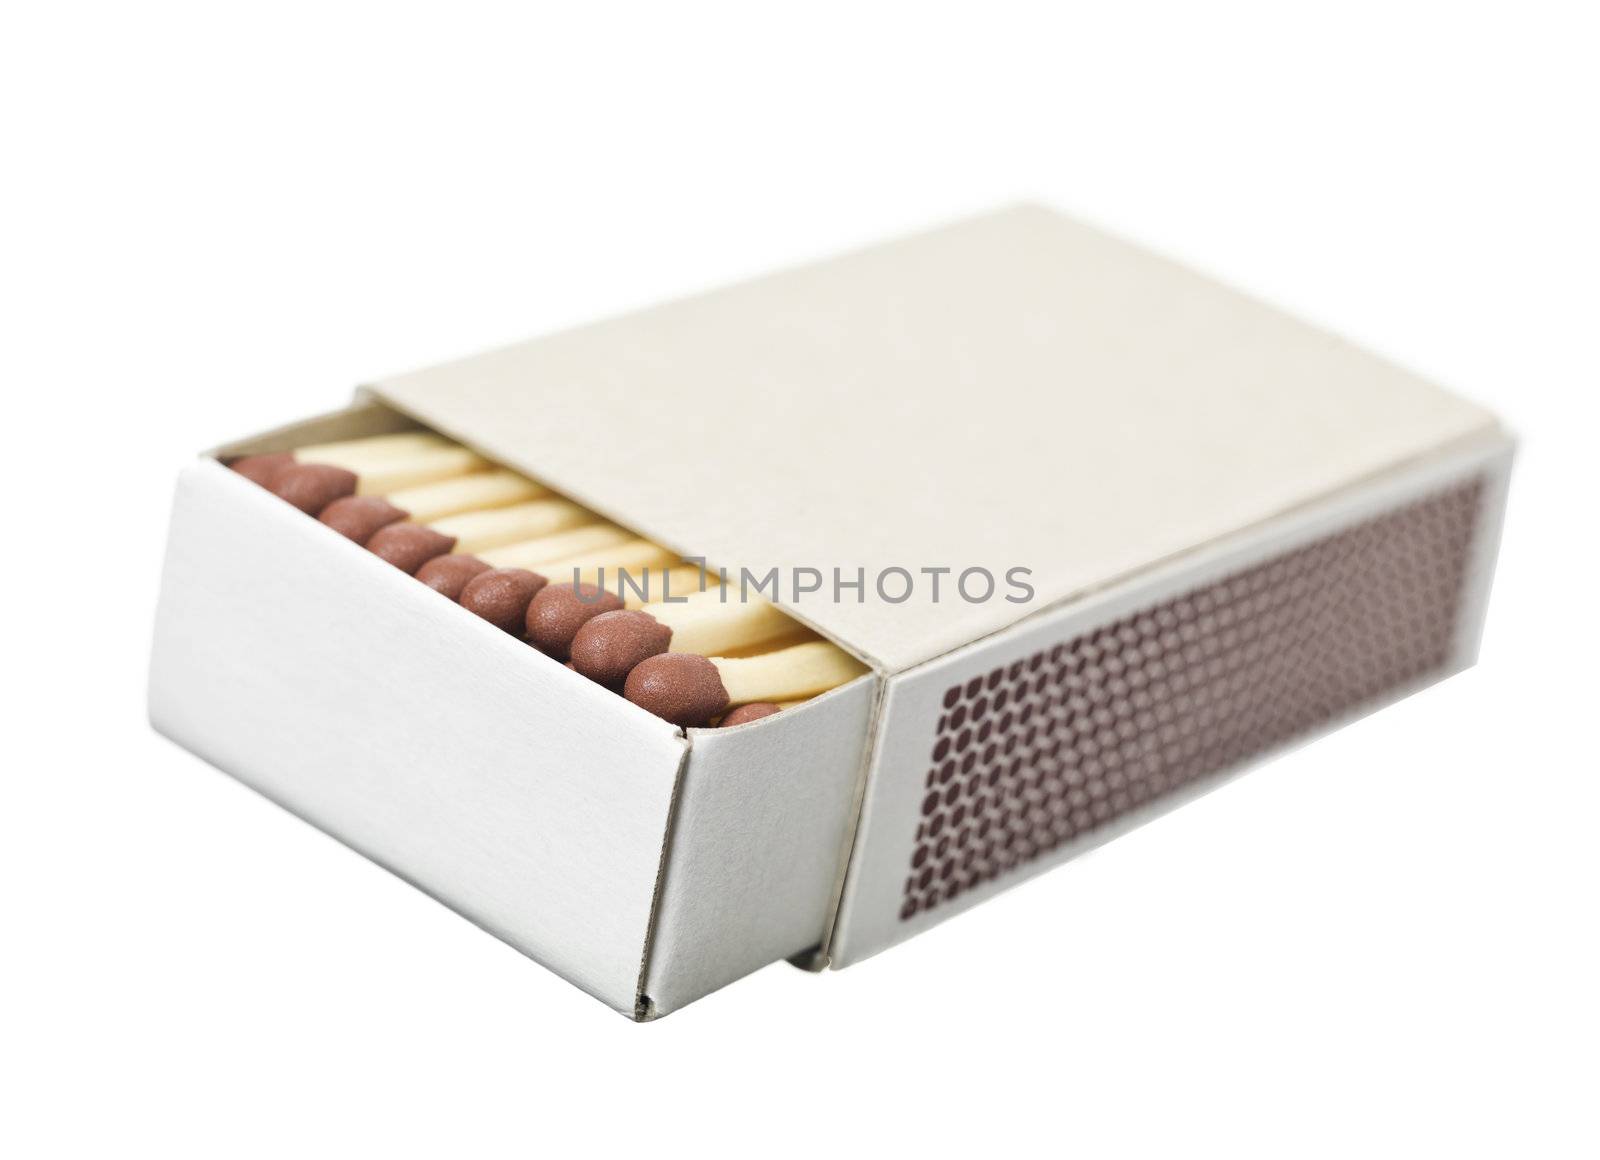 Safety Matches by gemenacom